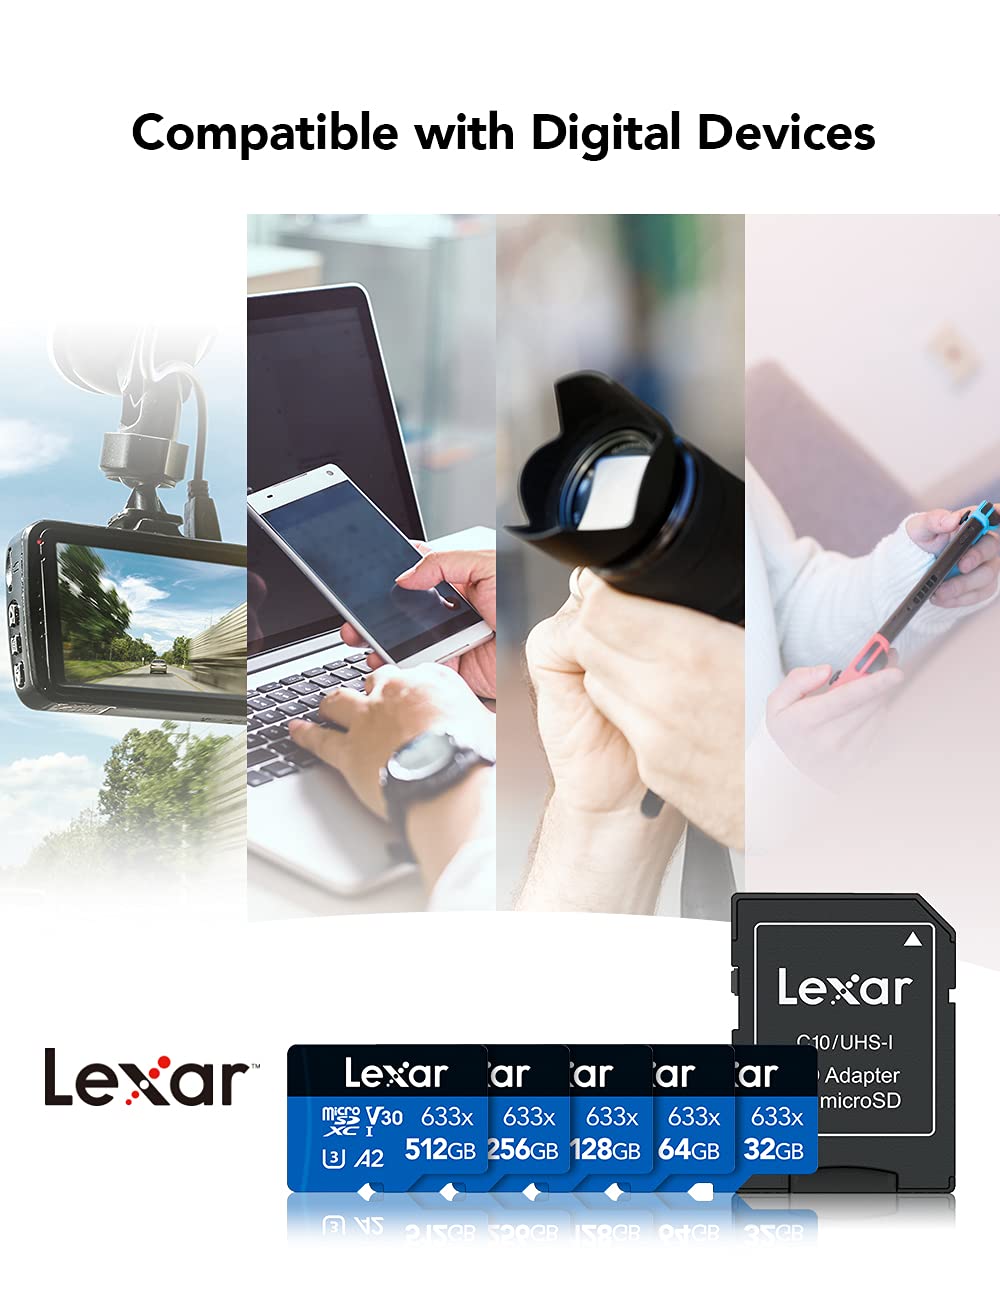 Lexar High-Performance 633x 128GB microSDXC UHS-I Card with SD Adapter, C10, U3, V30, A1, Full-HD & 4K Video, Up To 100MB/s Read, for Smartphones, Tablets, and Action Cameras (LSDMI128BBNL633A)